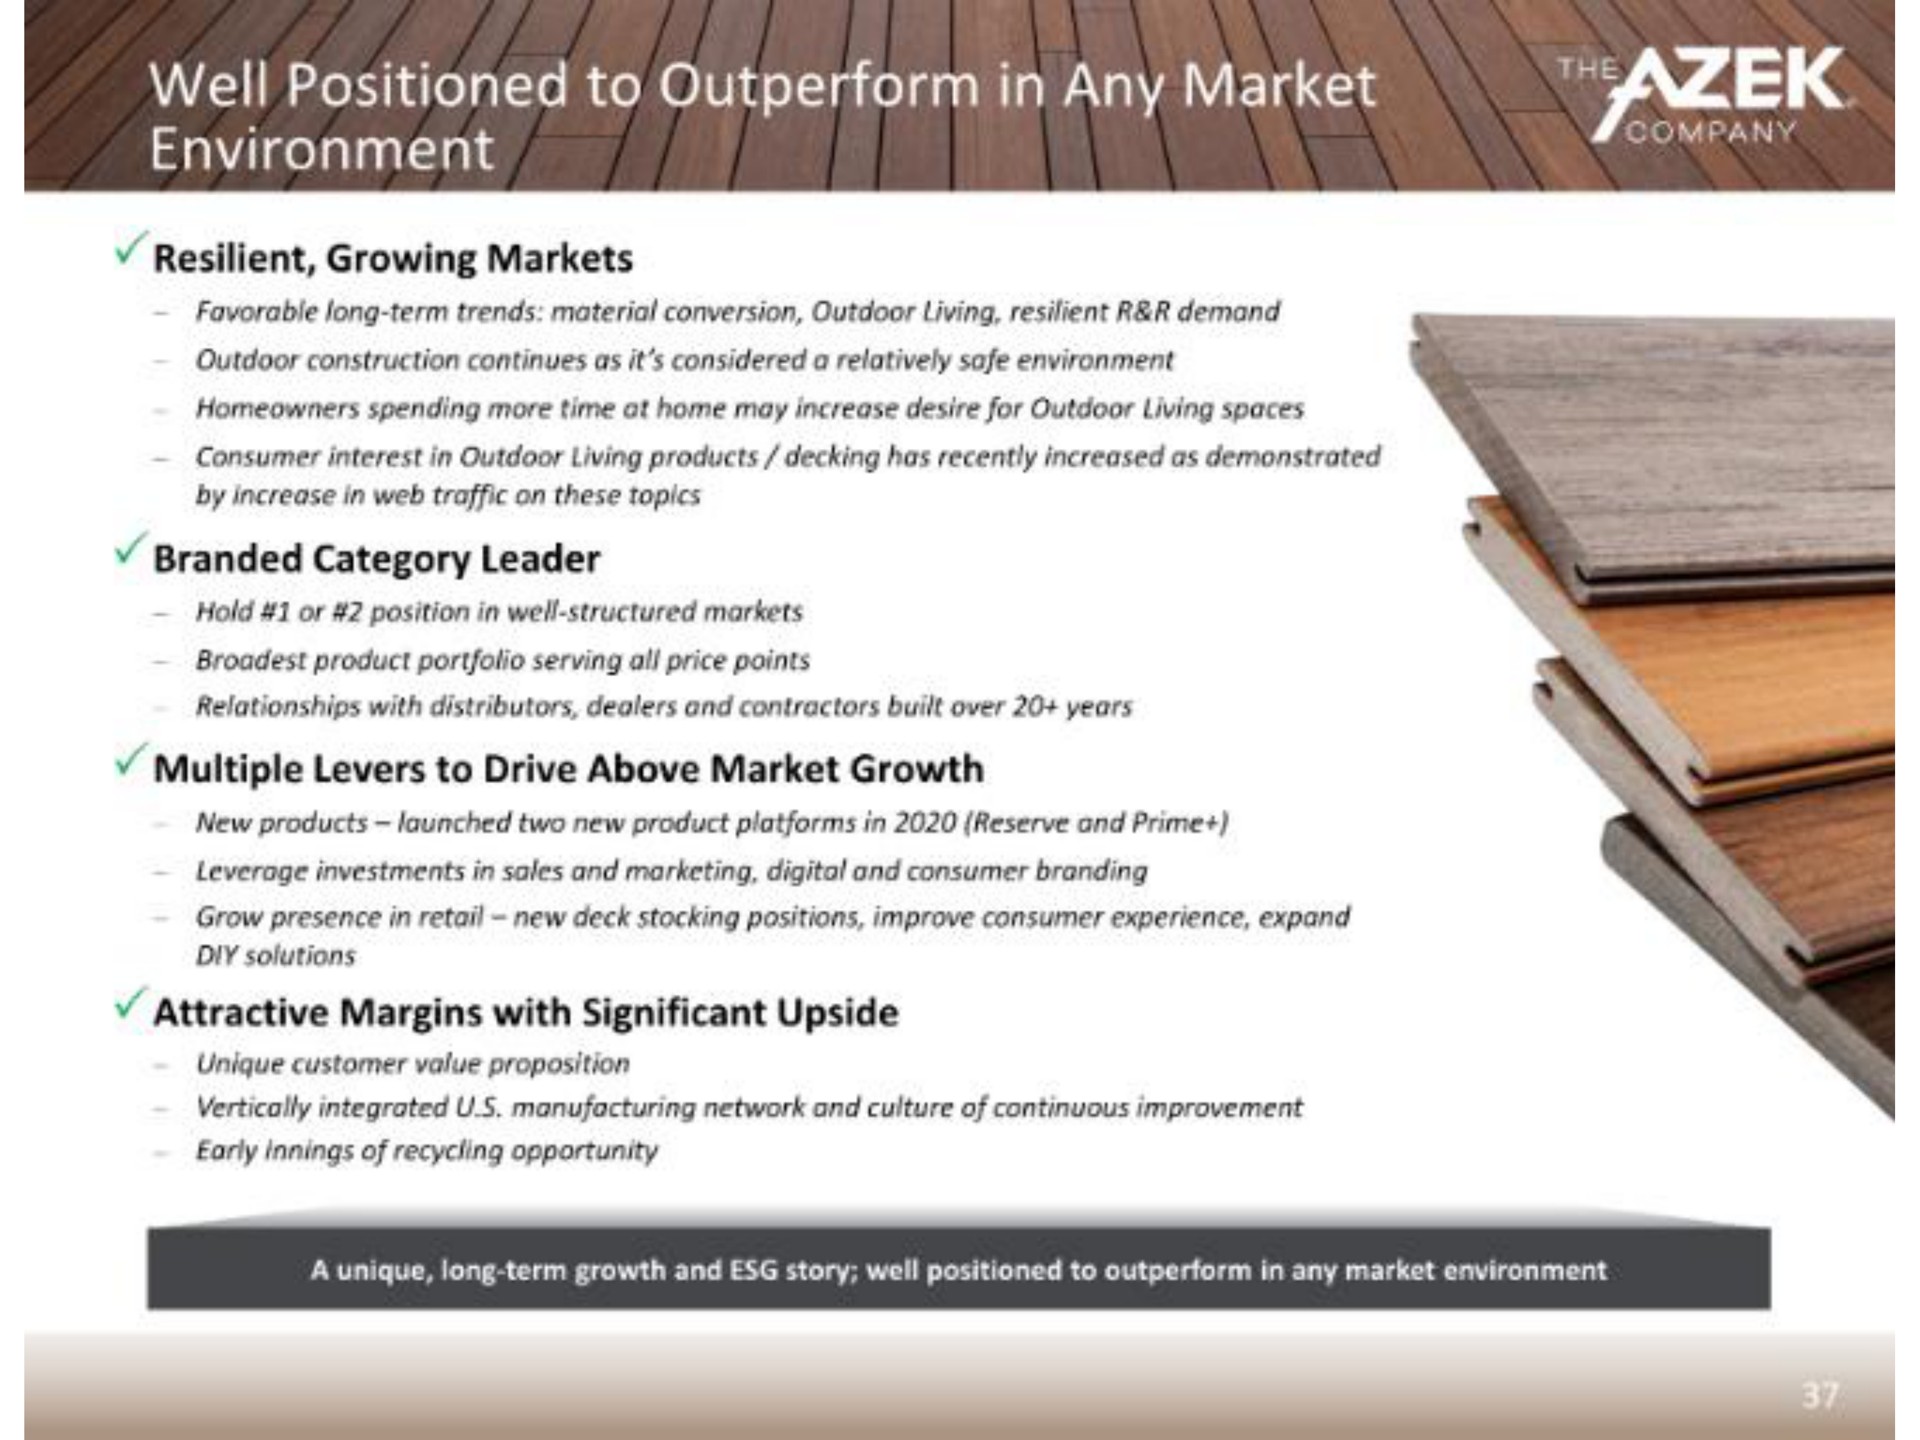 well positioned to outperform in any market environment resilient growing markets branded category leader multiple levers to drive above market growth attractive margins with significant upside | Azek